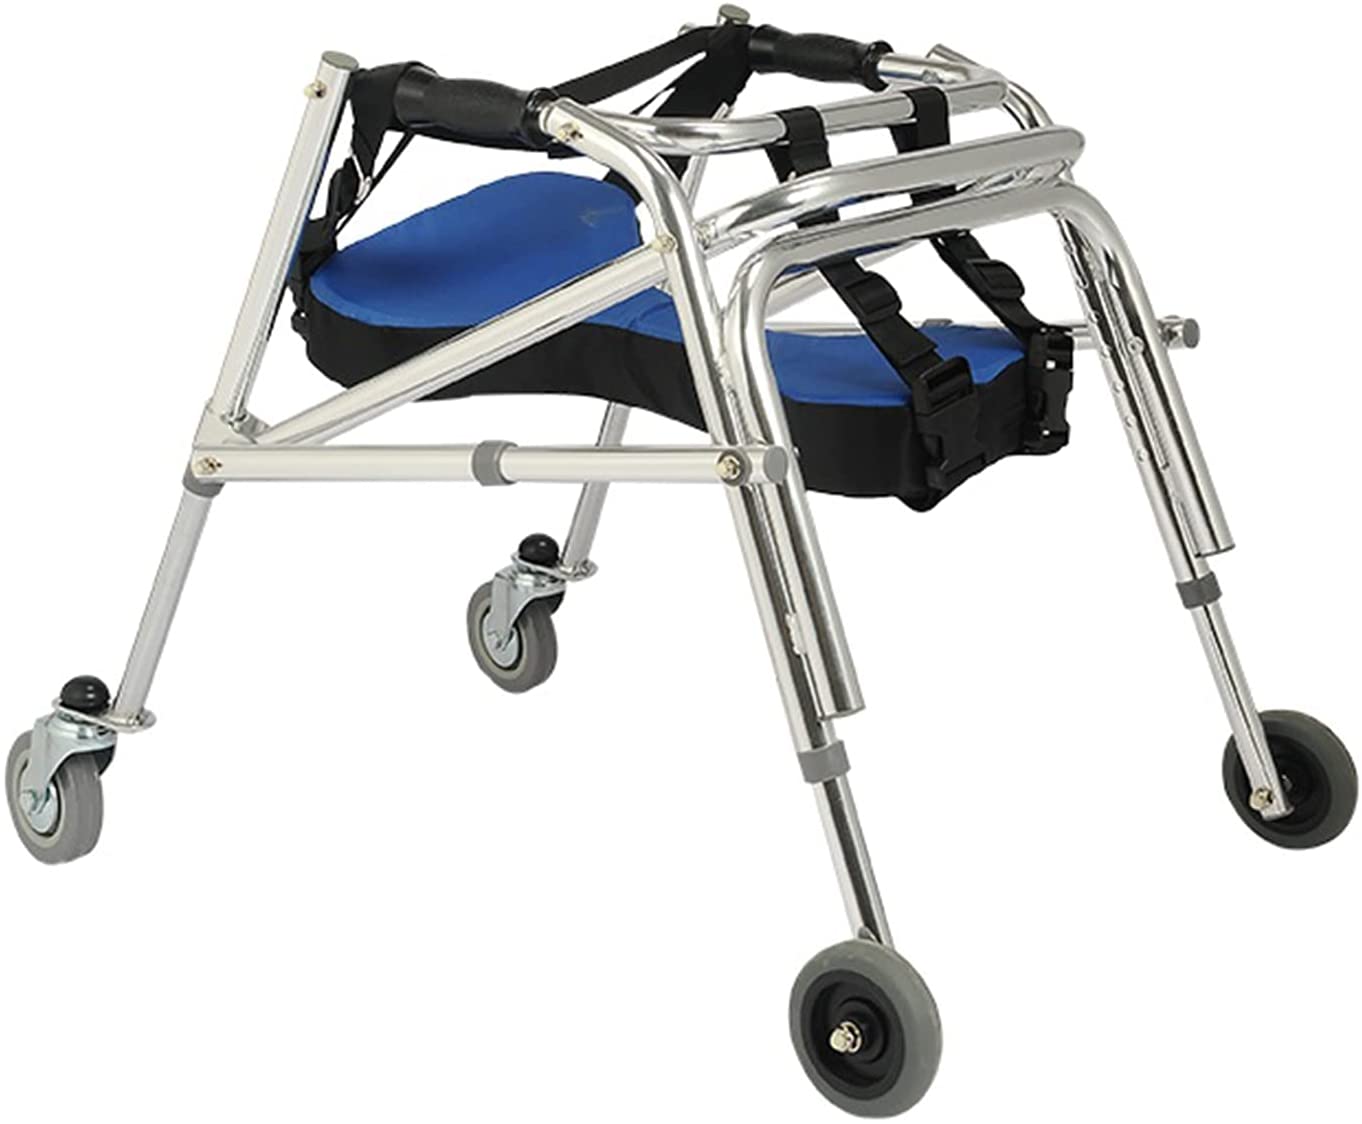 Daily necessities LTD Foldable Rollator for Children with Wheels, Height Adjustable Gear Trainer Made of Aluminium Alloy, Lightweight Posterior Rollator Walker Disability Fracture Rehabilitation Practice Training Trolley